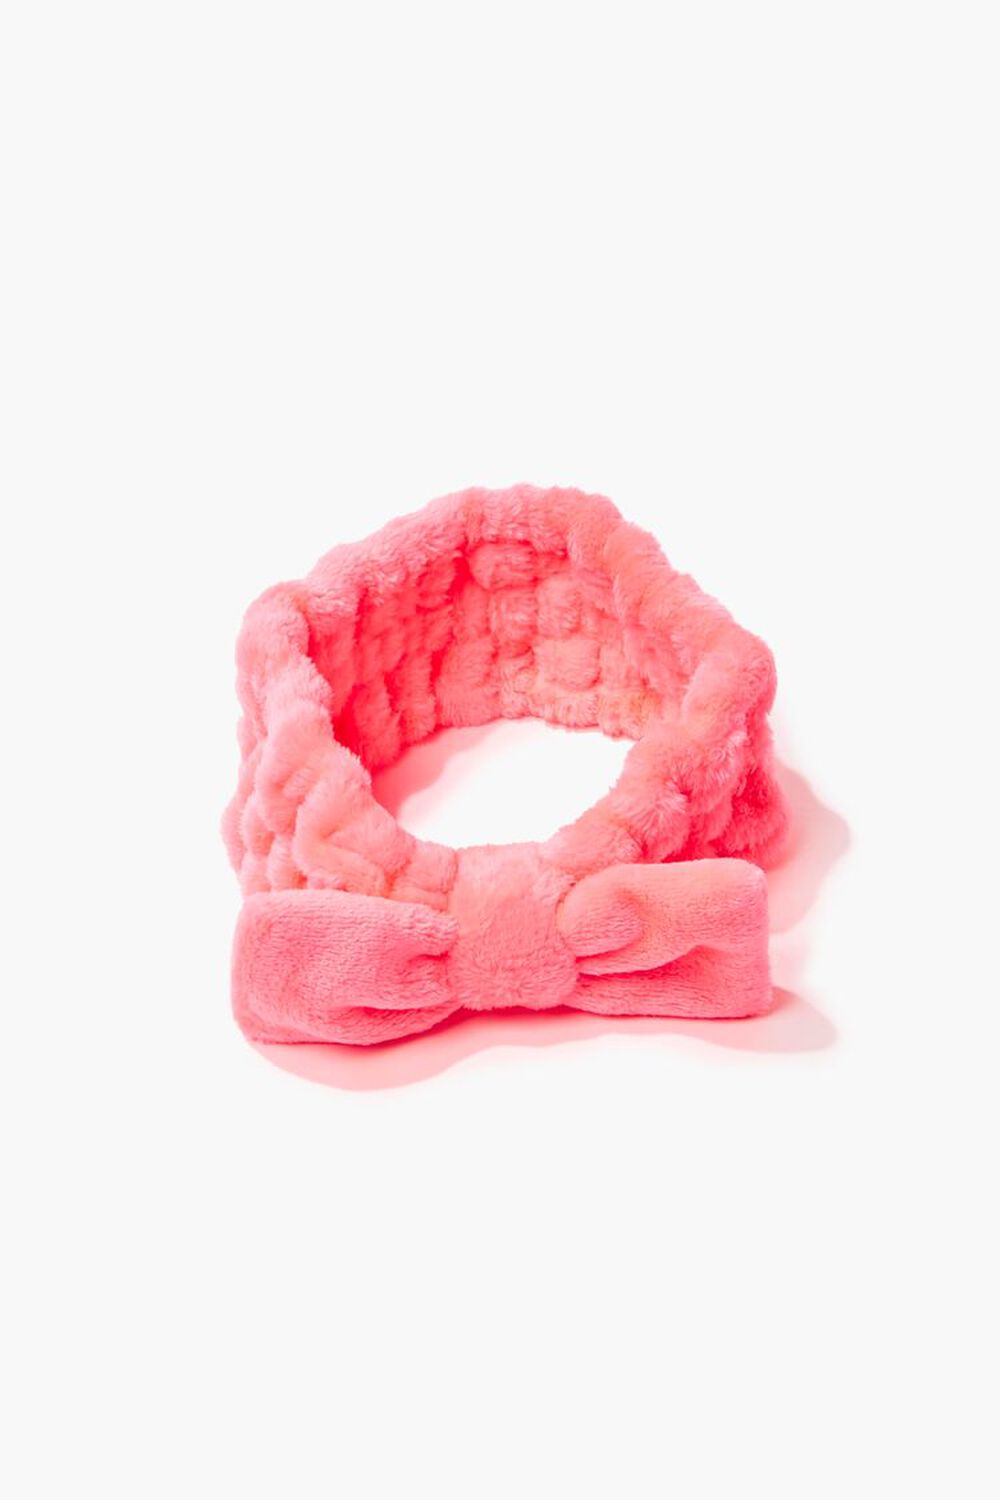 HOT PINK Bow-Top Plush Headwrap, image 2